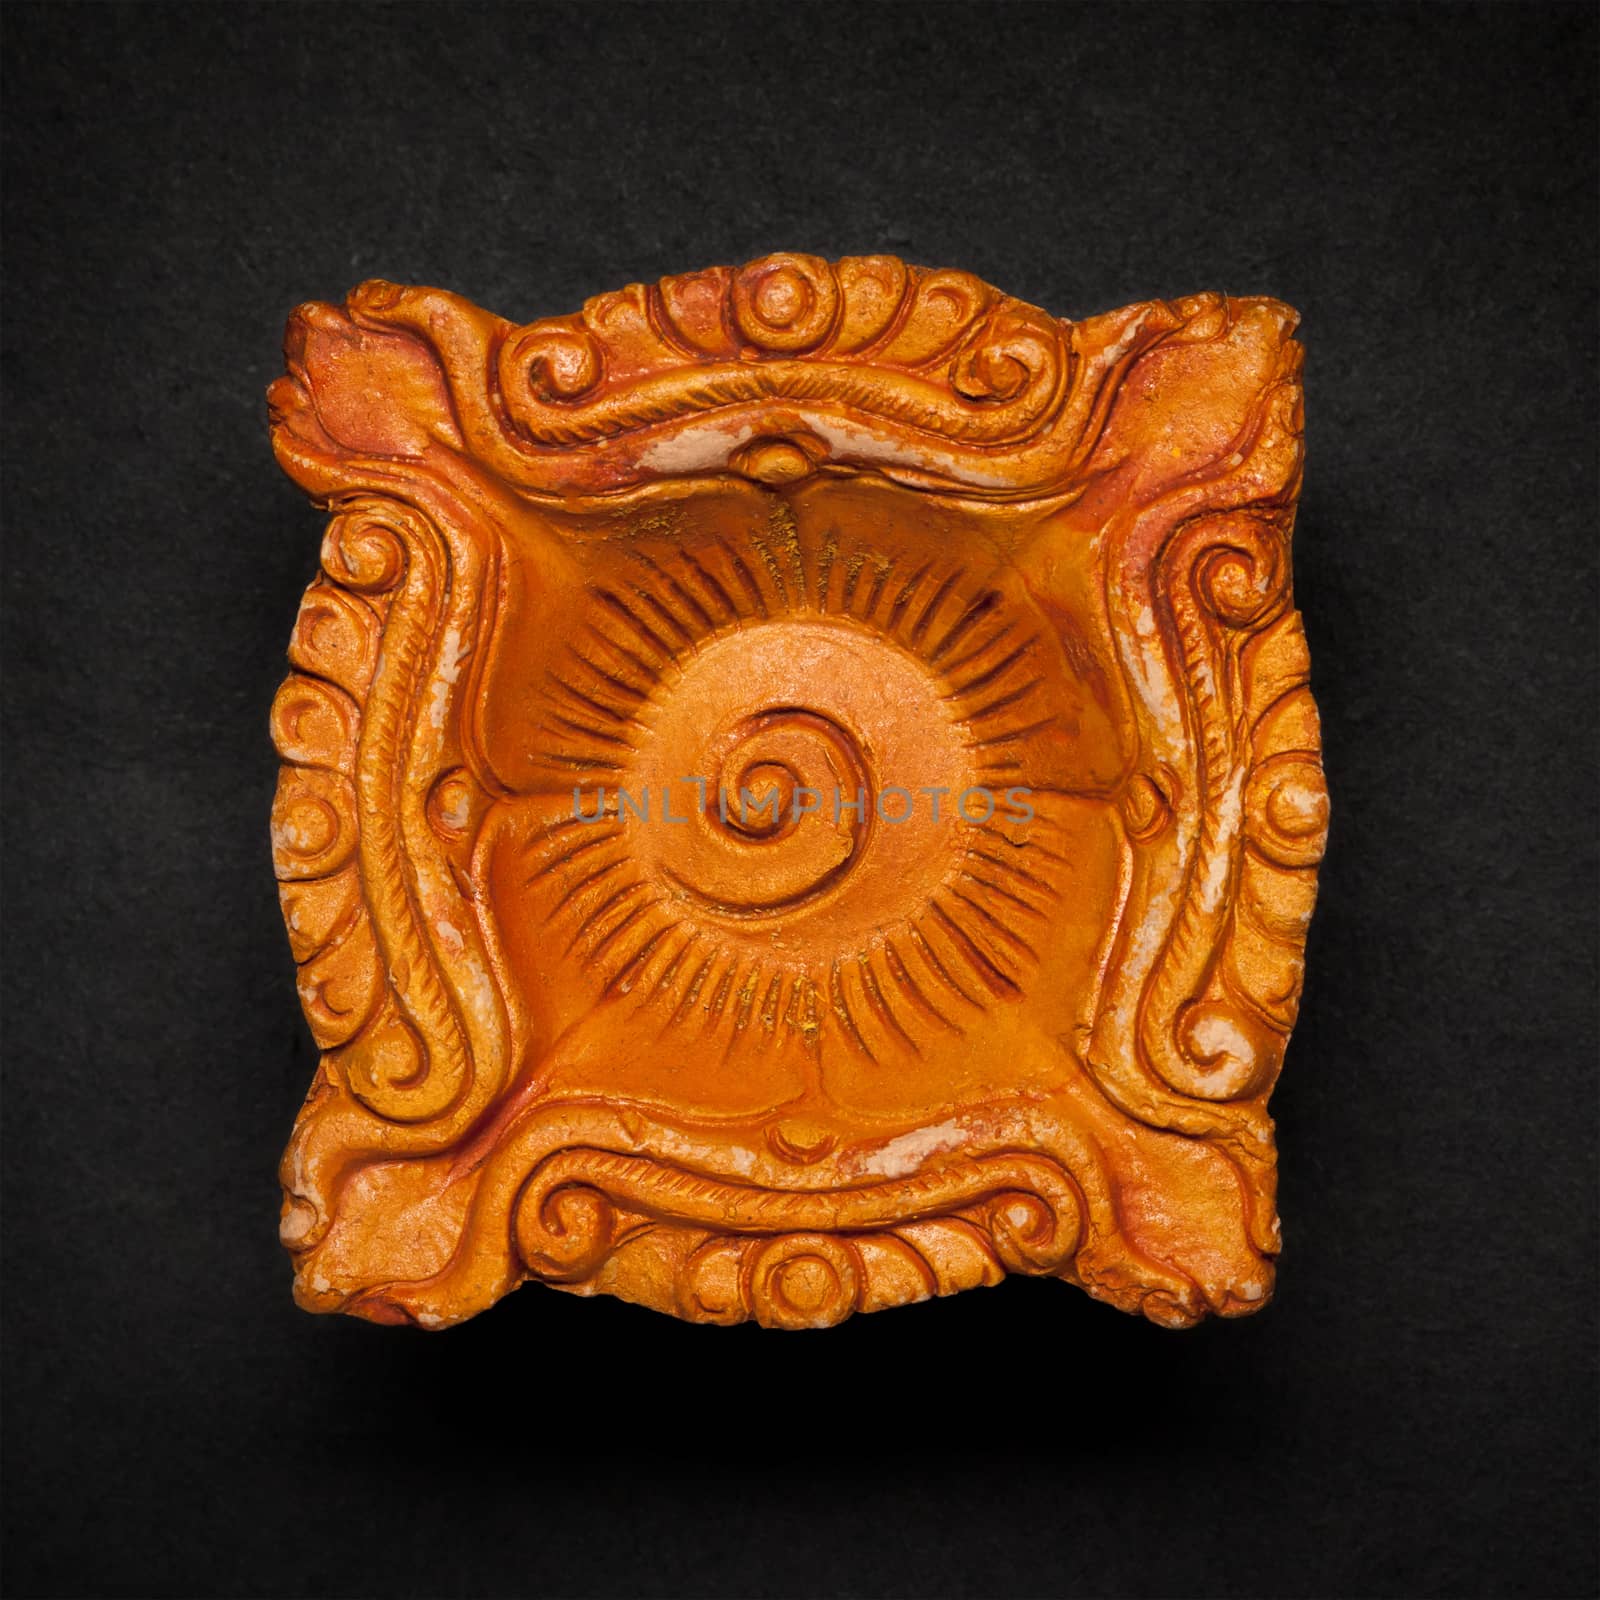 Top view of a beautifully carved designer handmade clay lamp on dark background.